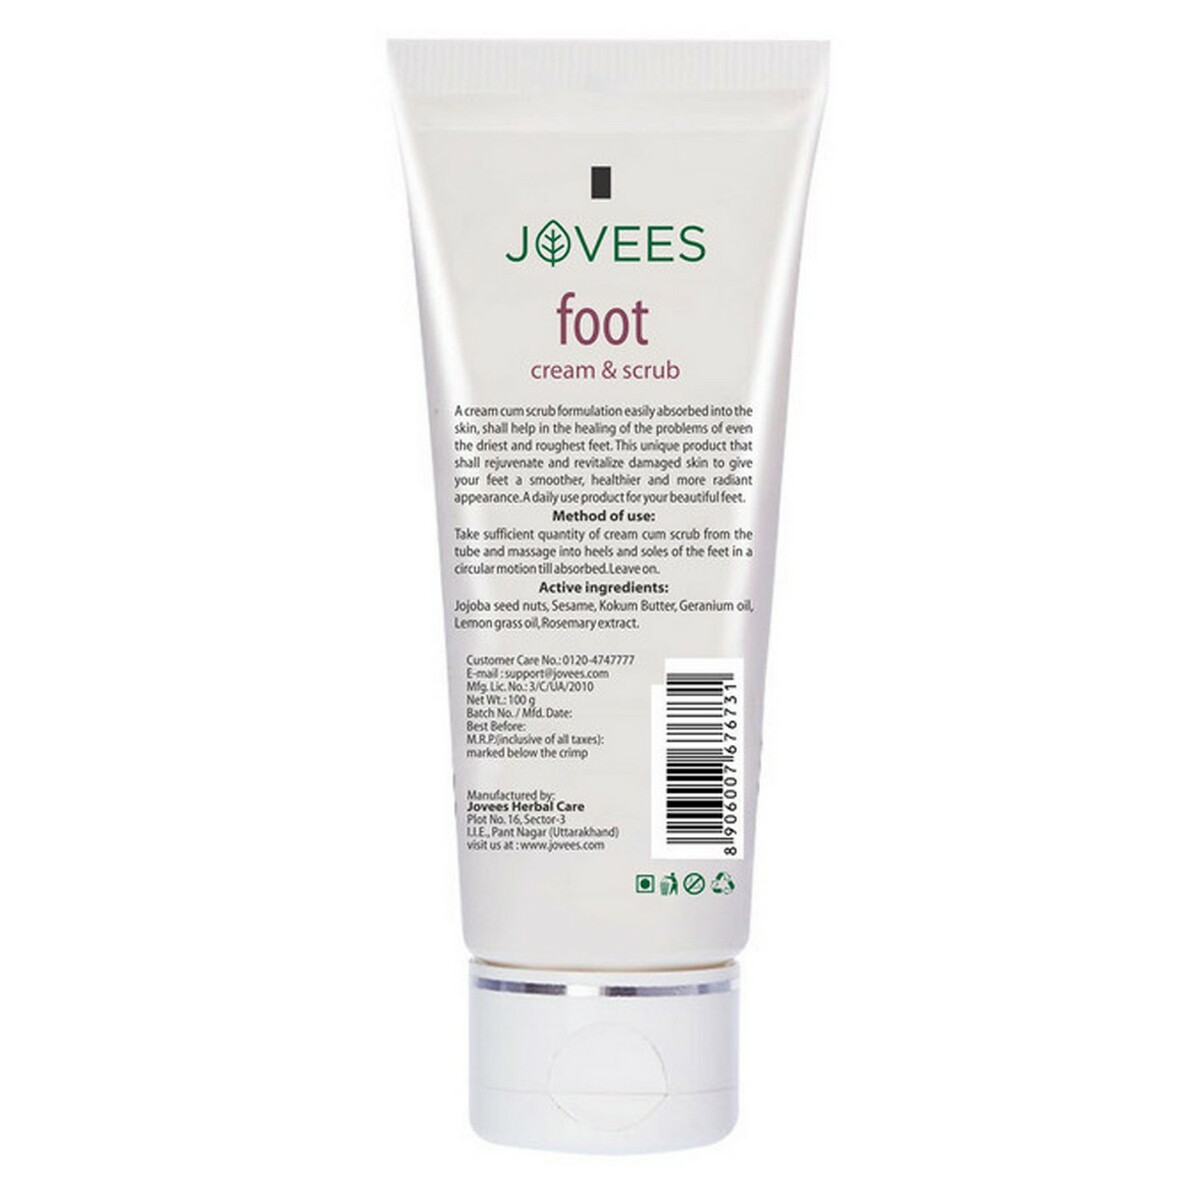 Jovees Foot Care 2 In 1 100g